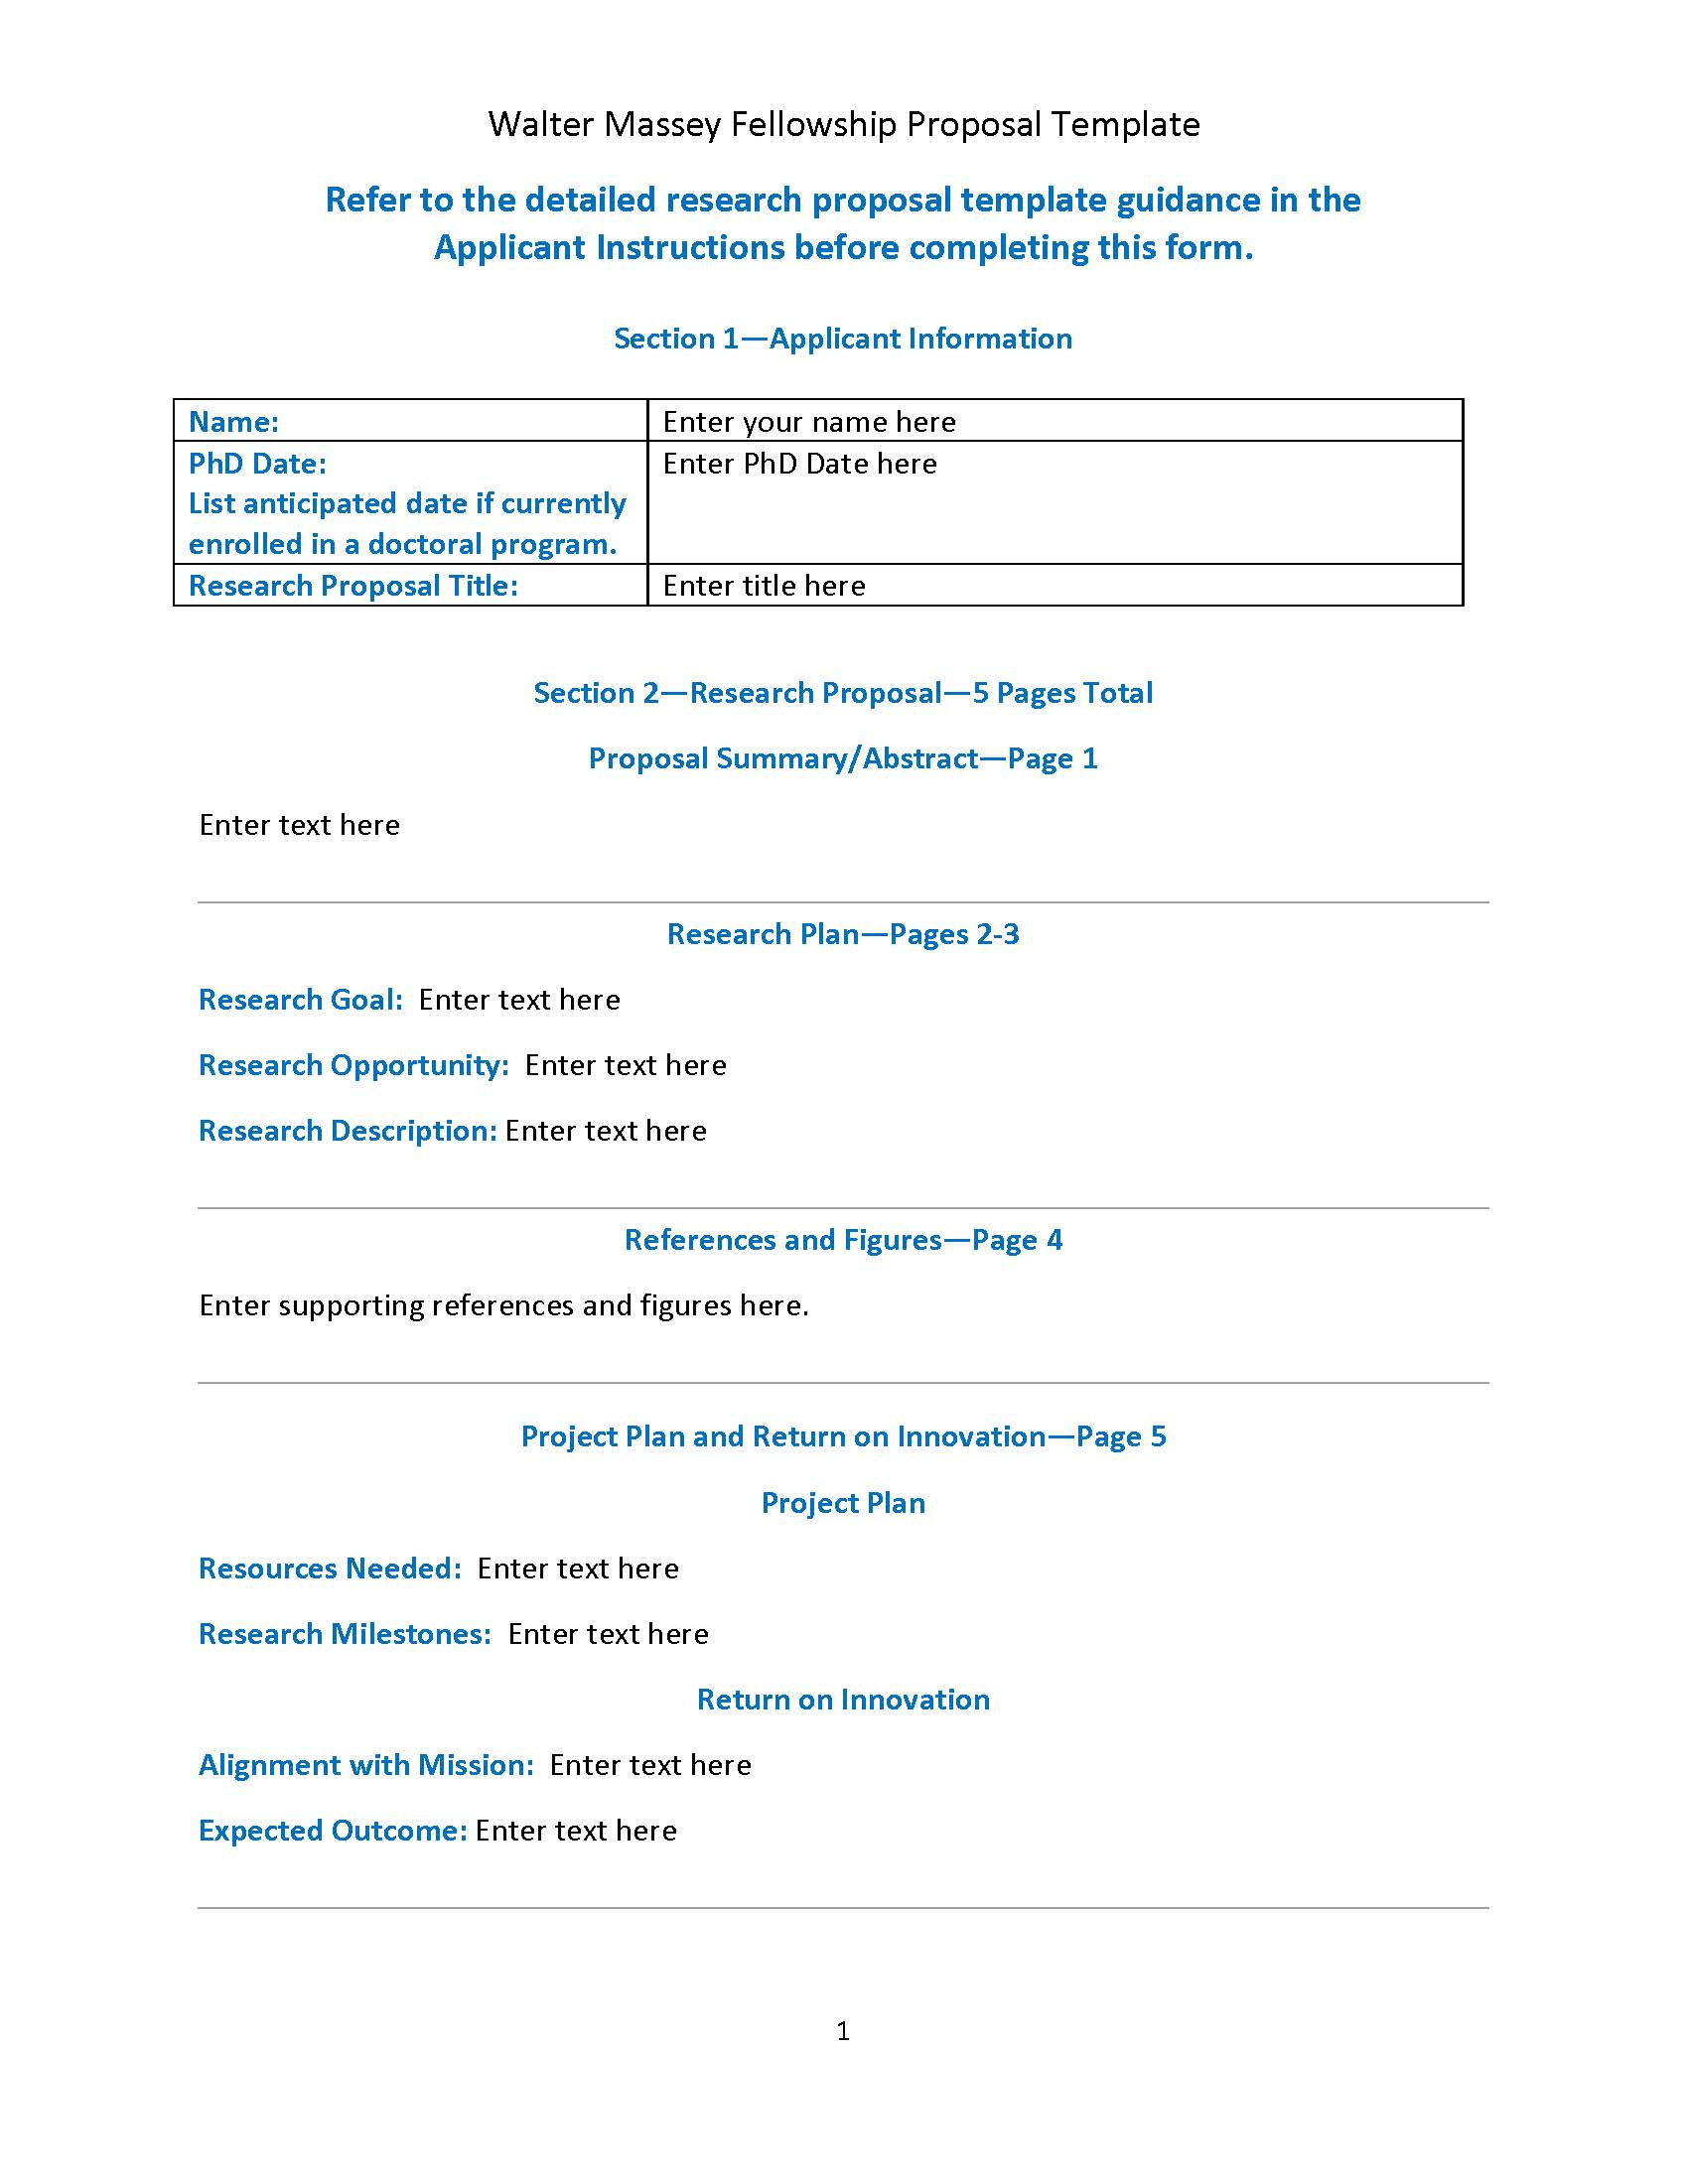 Image of the Walter Massey Fellowship proposal template